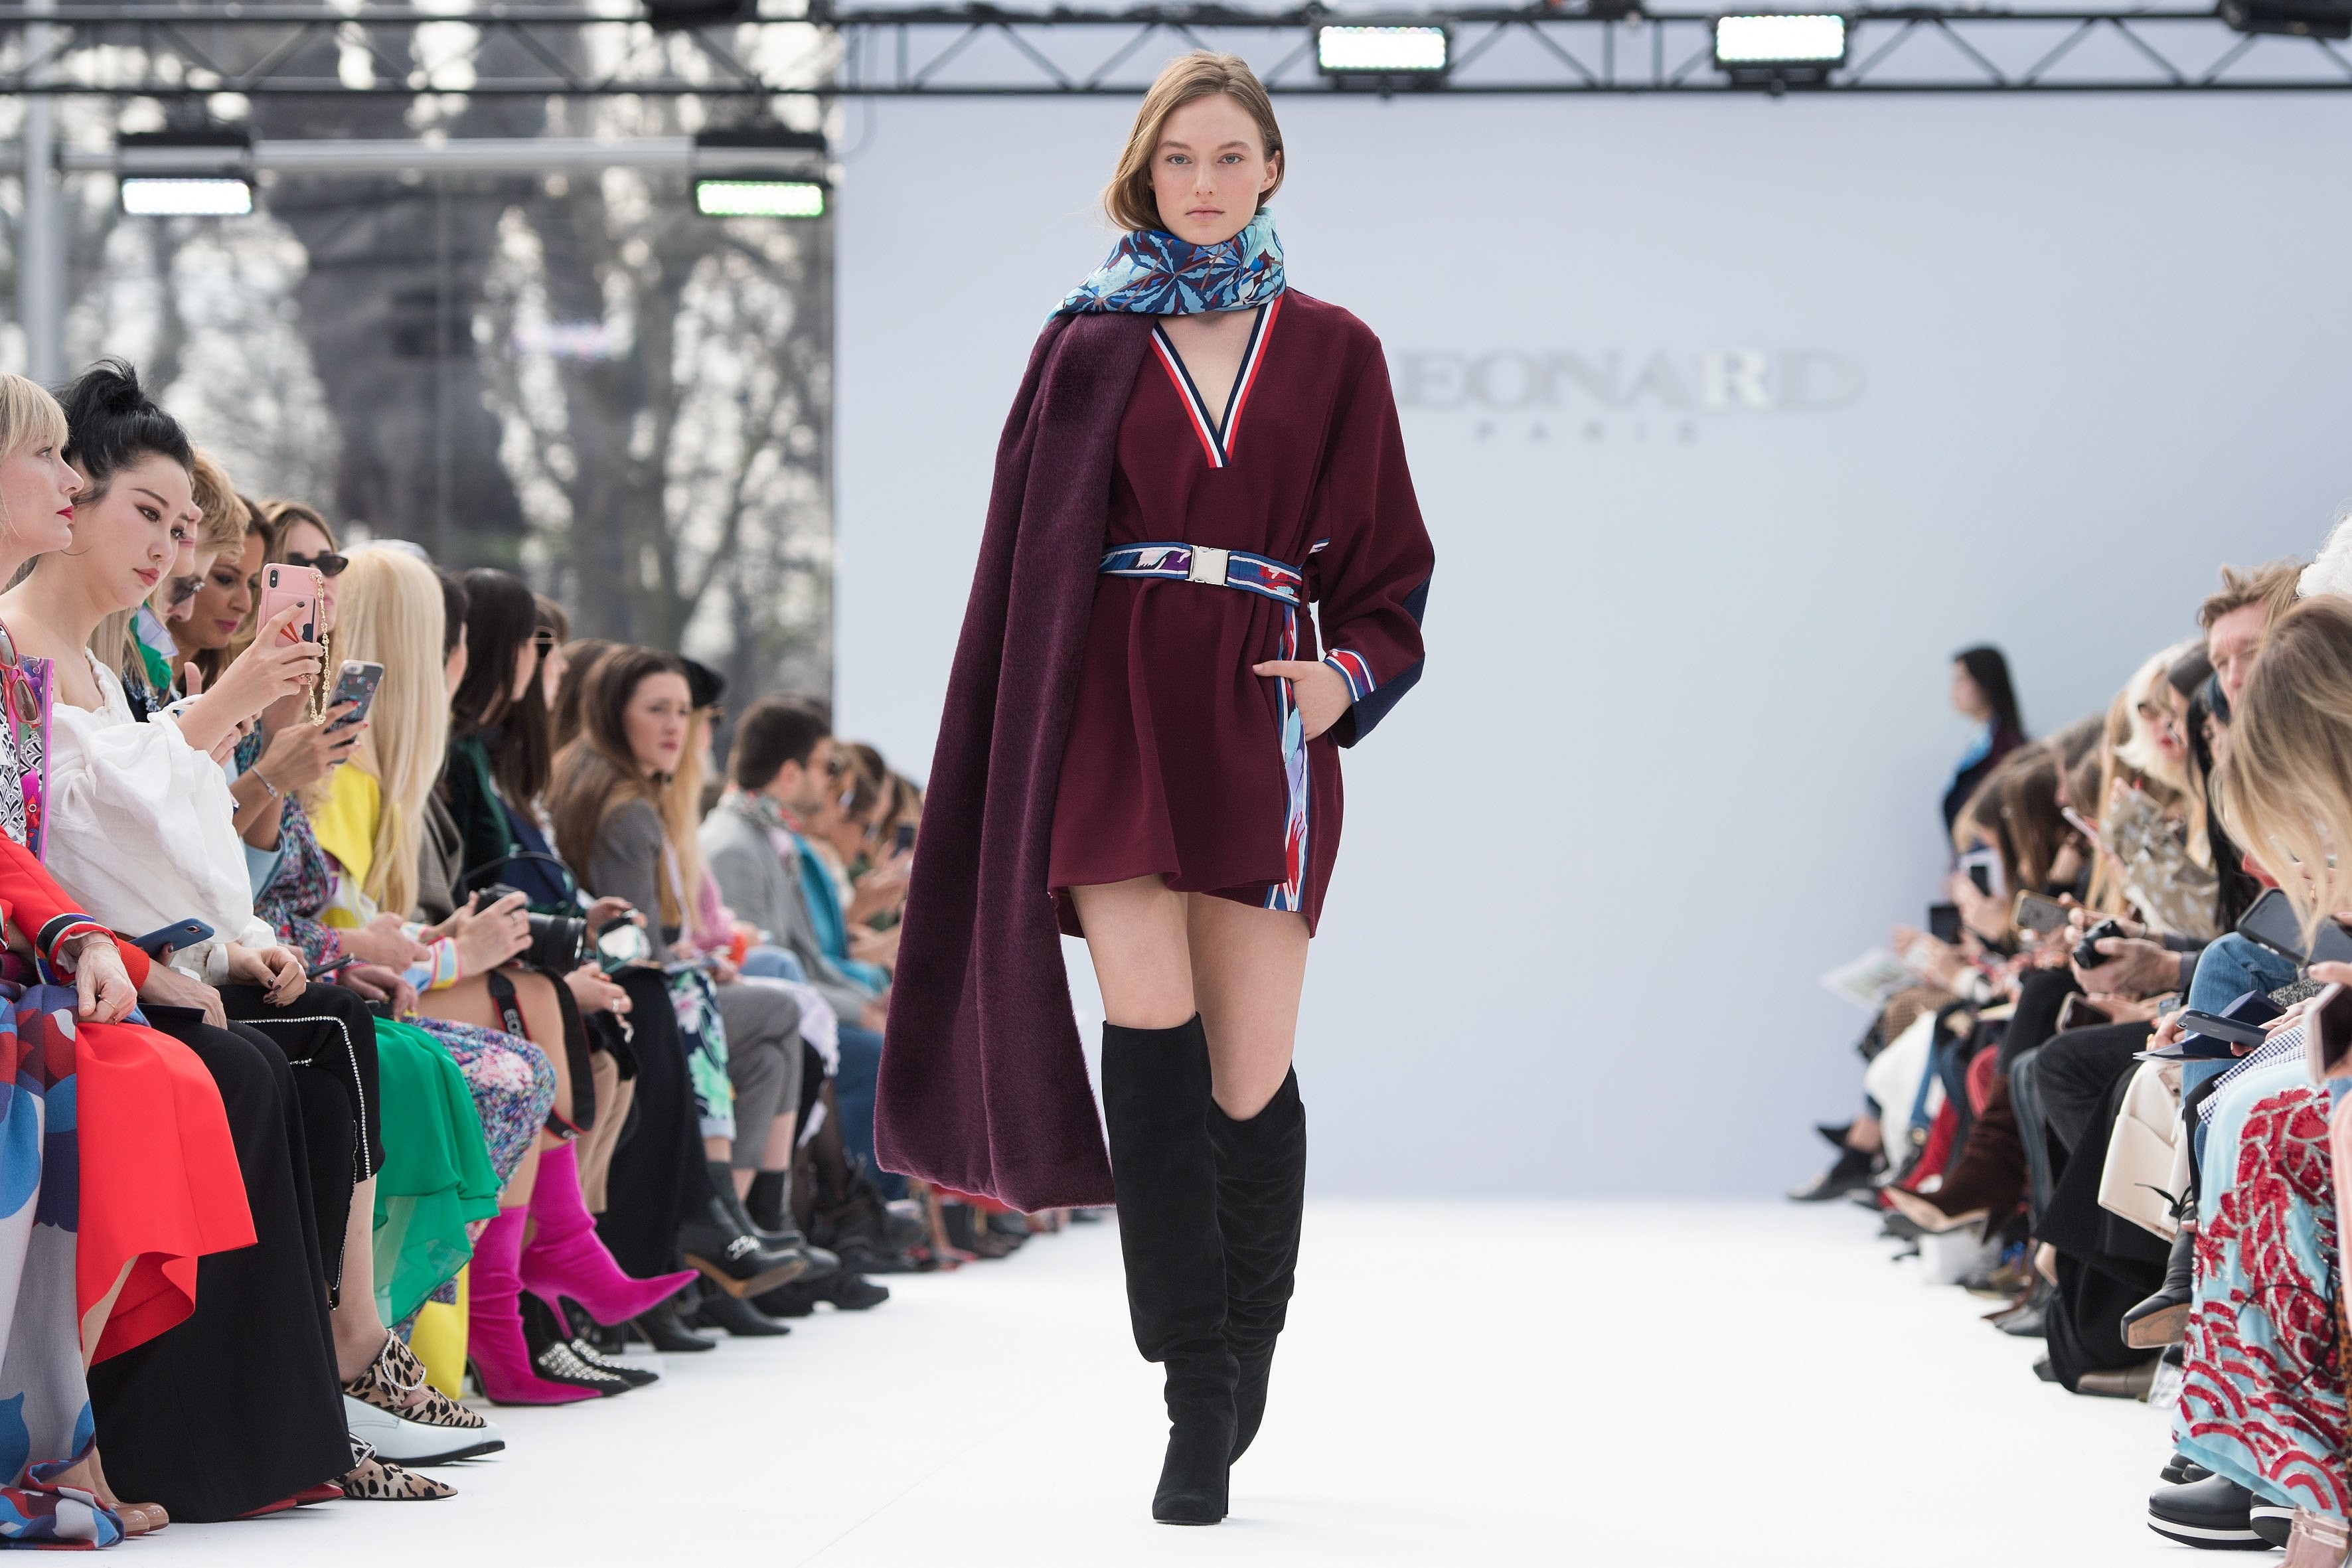 Paris Fashion Week: spring floral abounds at ‘retro’ Valli and Leonard ...